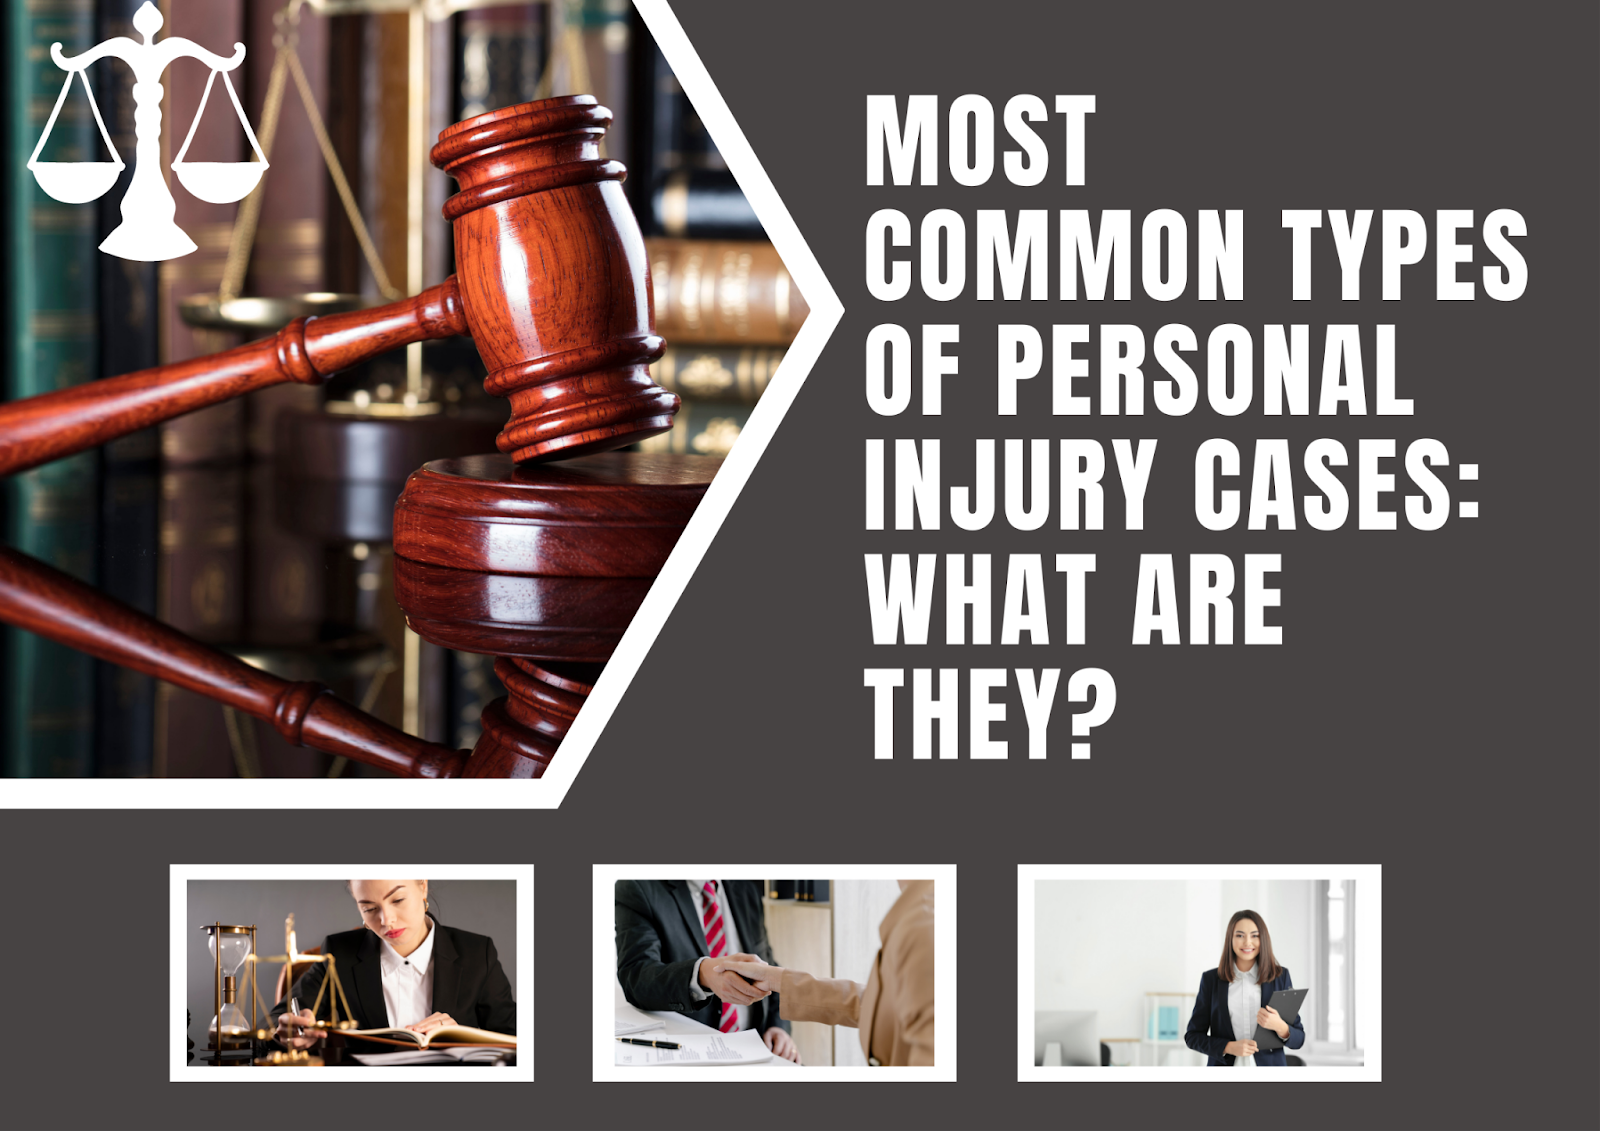 Most Common Types of Personal Injury Cases: What Are They?